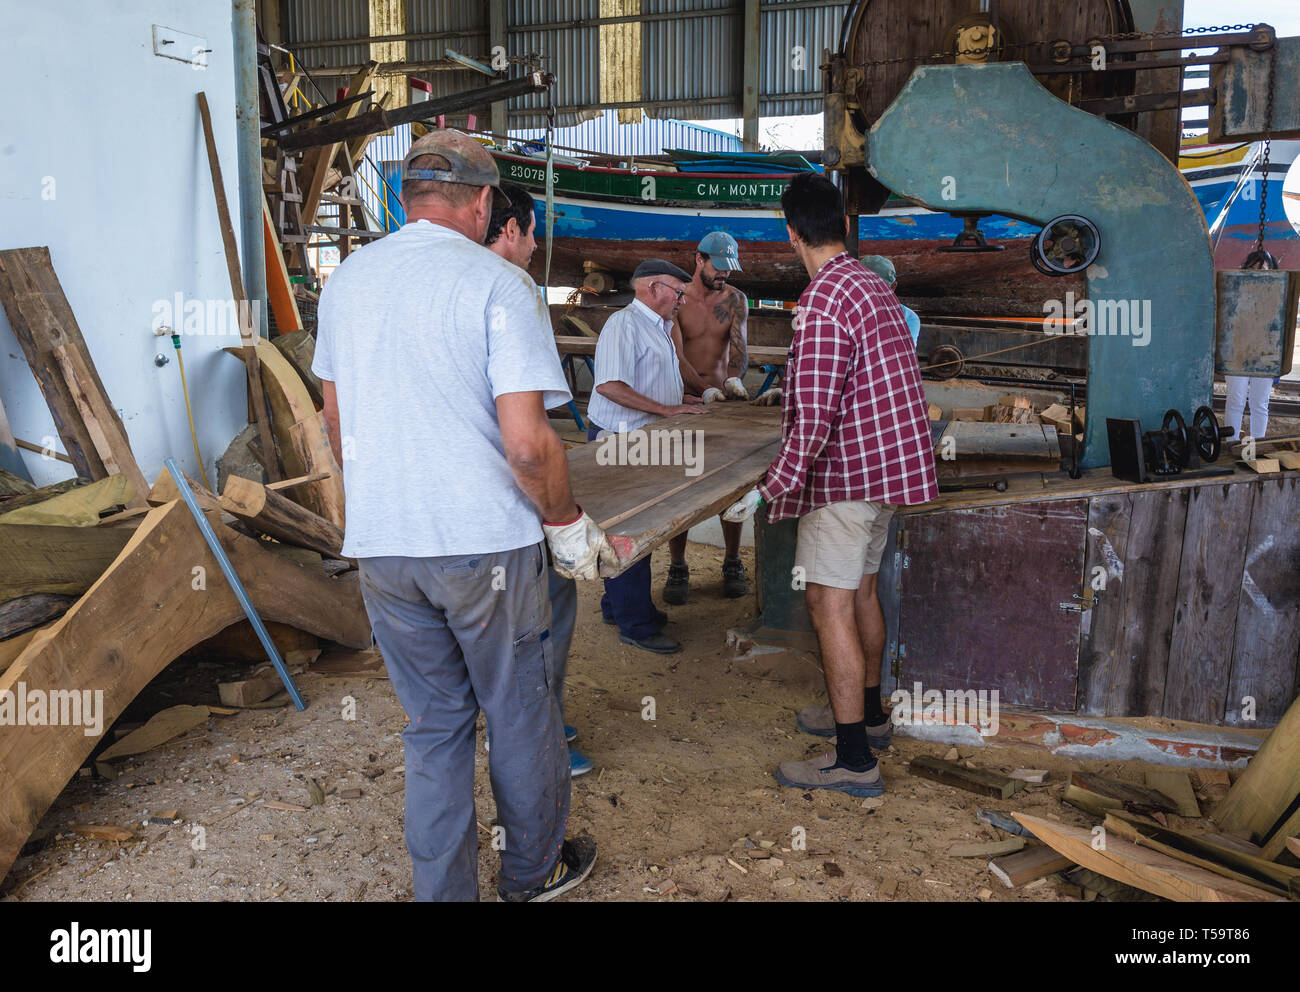 Workers of shipyard in which traditional Tagus River boats are constructed and repaired in Sarilhos Pequenos village in Moita municipality, Portugal Stock Photo